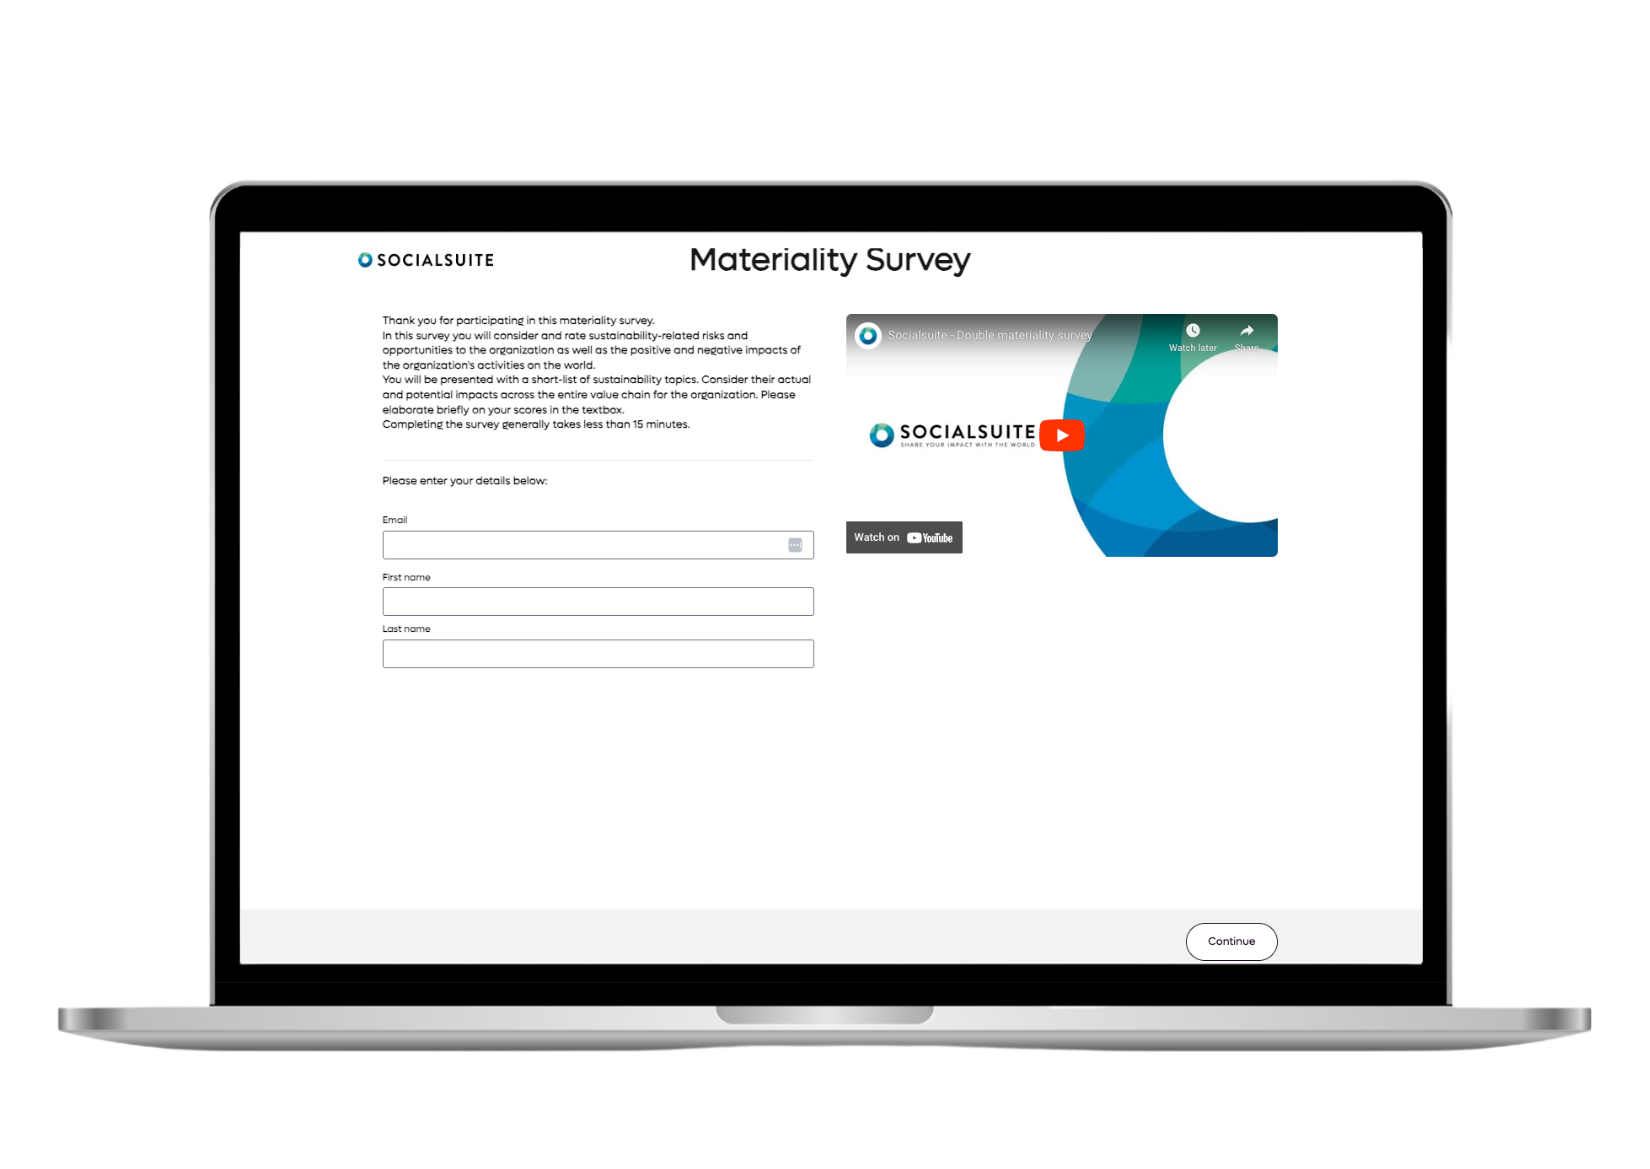 Our materiality software has a survey aspect that provides quantitative data from your key stakeholders. Our platform collects, stores, and analyzes the survey data in real time.